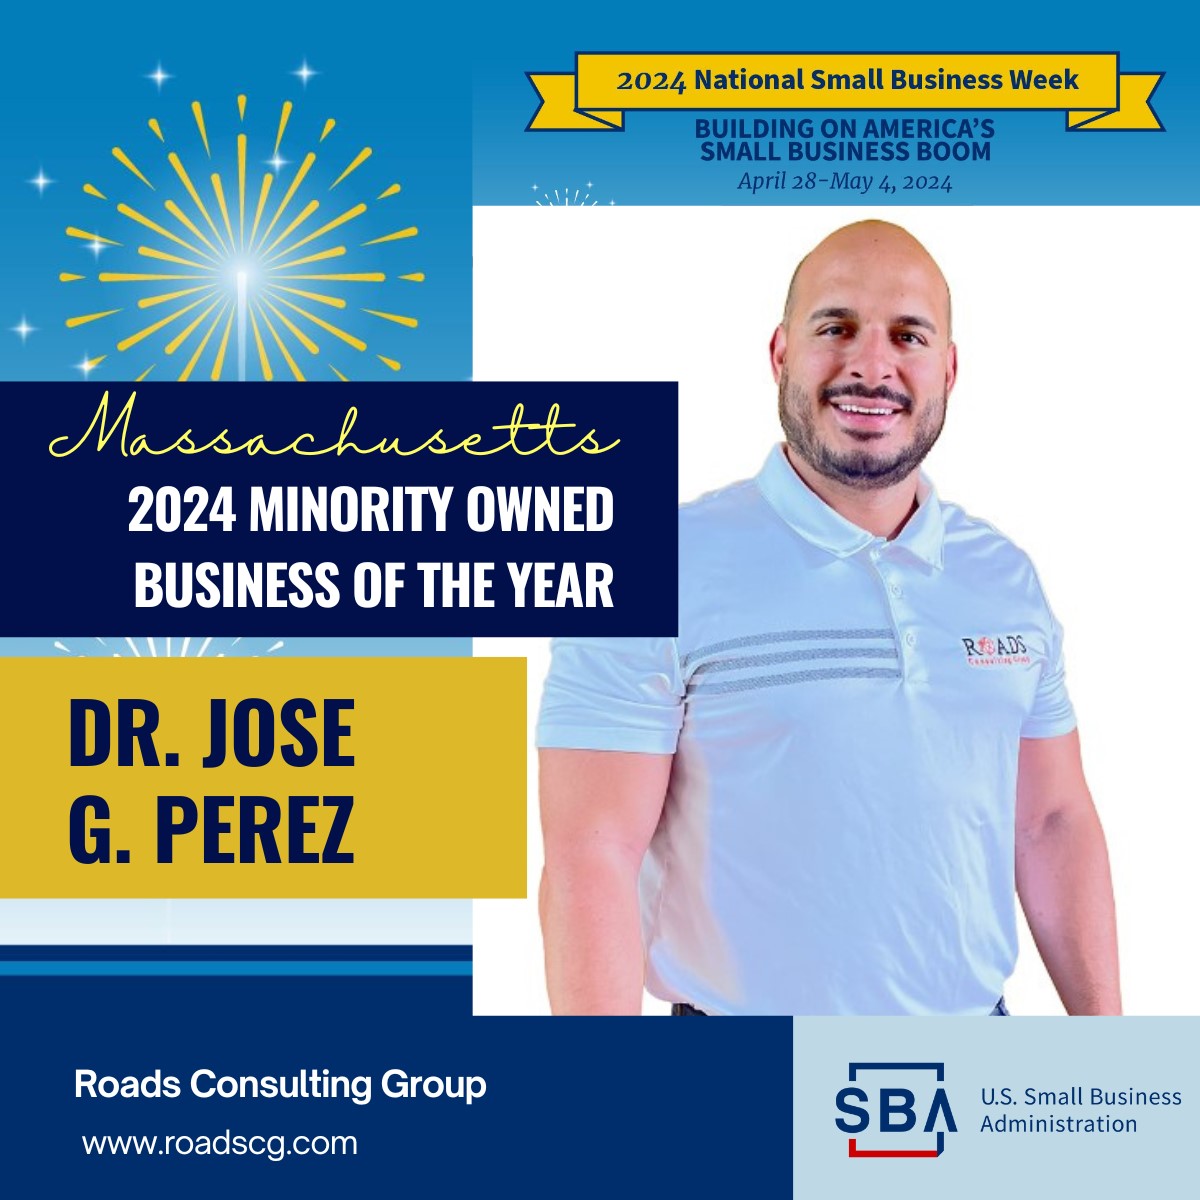 🏆 Congratulations! The 2024 #Massachusetts Minority Owned Business of the Year is Dr. Jose G. Perez, CEO of Roads Consulting Group @roadscgusa #SmallBusinessWeek